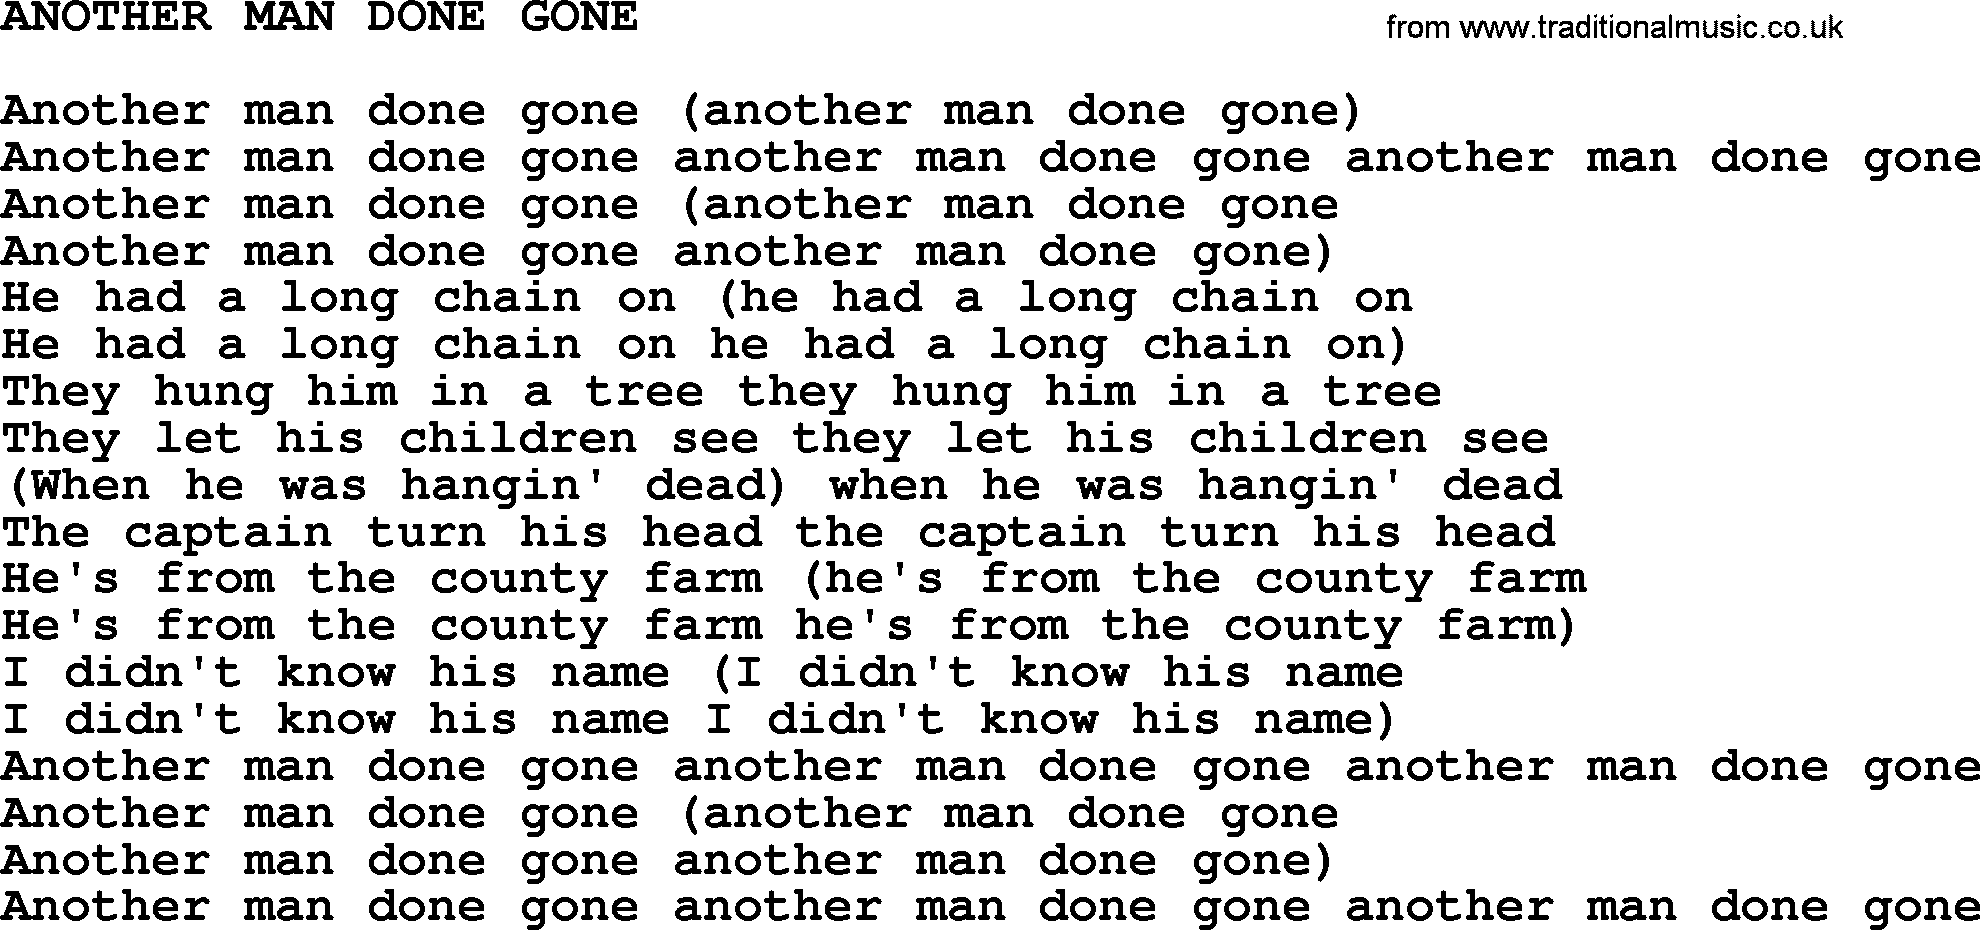 Johnny Cash song Another Man Done Gone.txt lyrics